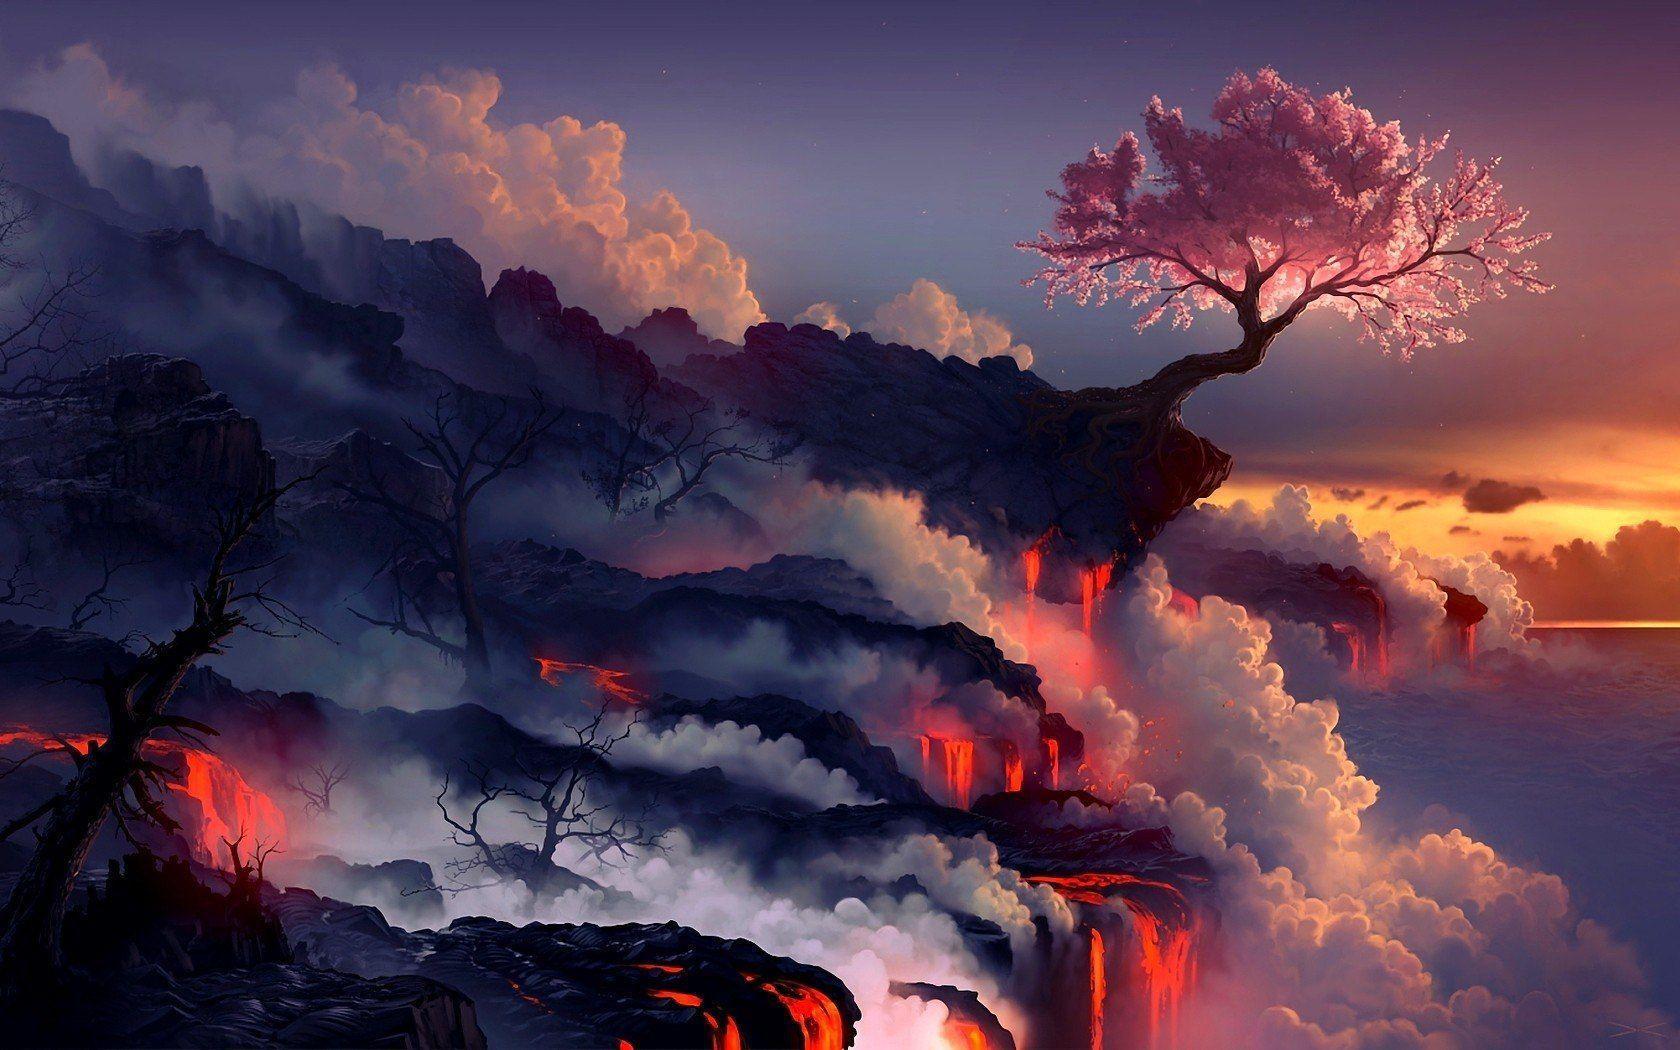 And Lava Landscape Wallpaper High Quality 1680x1050PX Image